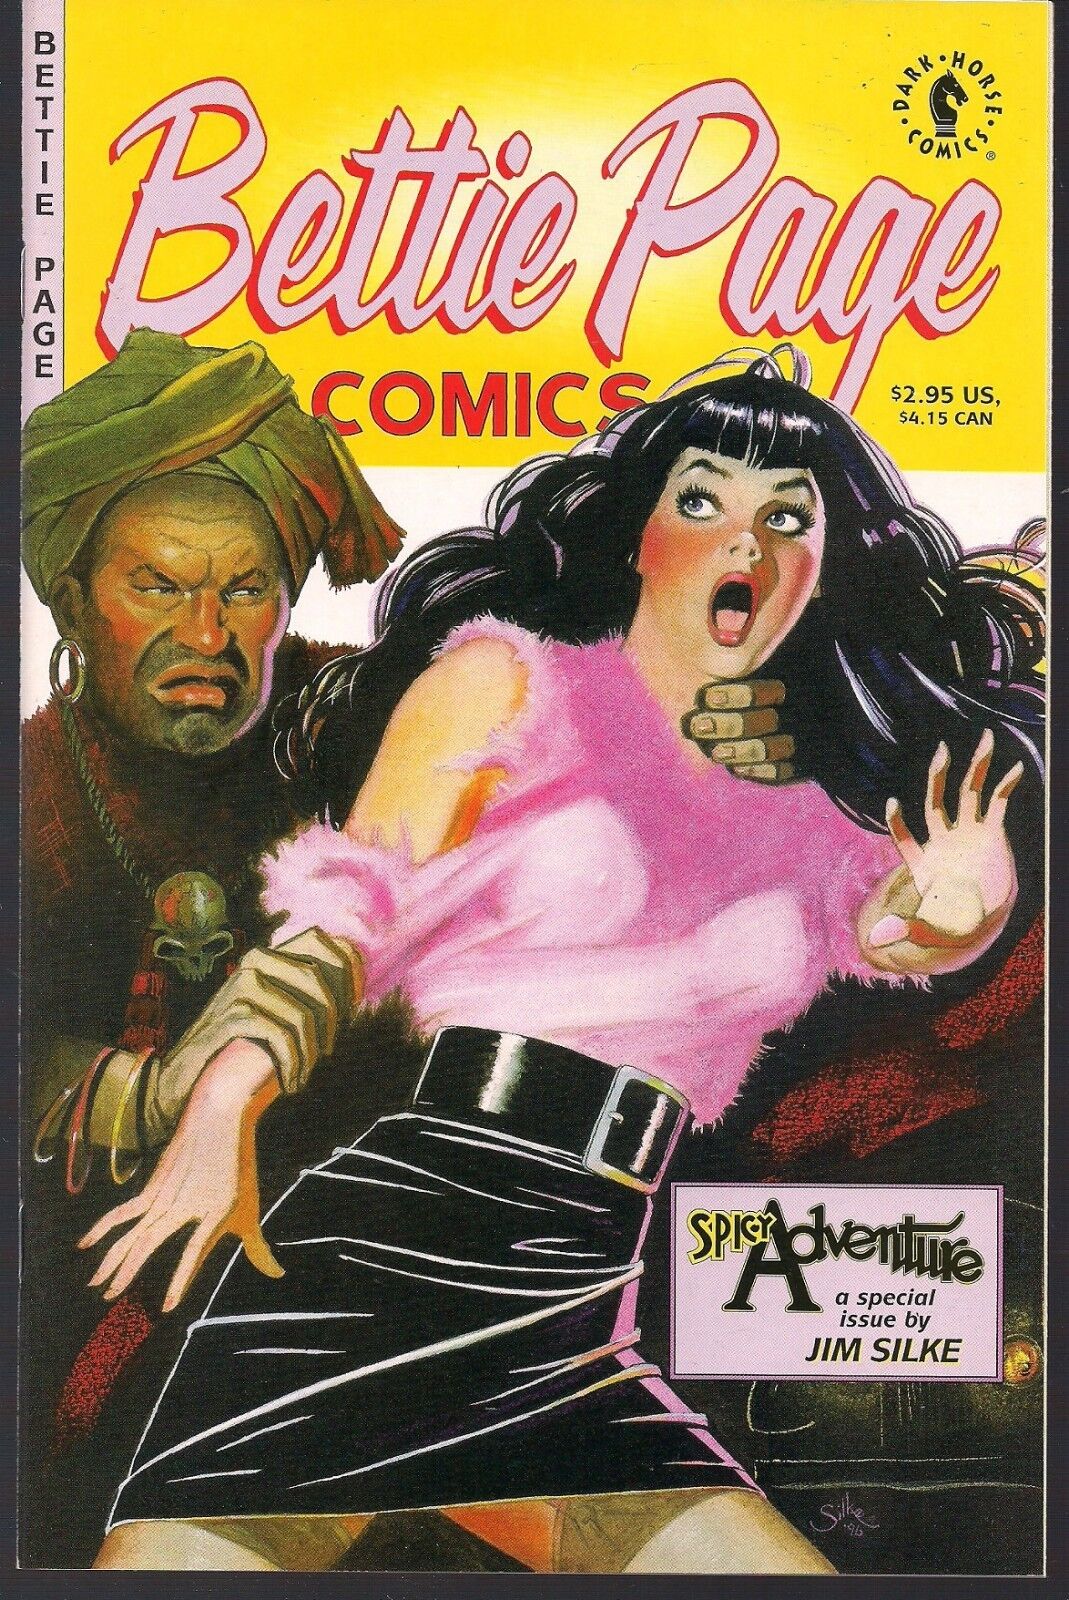 BETTIE PAGE COMICS SPICY ADVENTURE DH '97 BOOK LENGTH TALE W/ GALLERY SILKE NM-